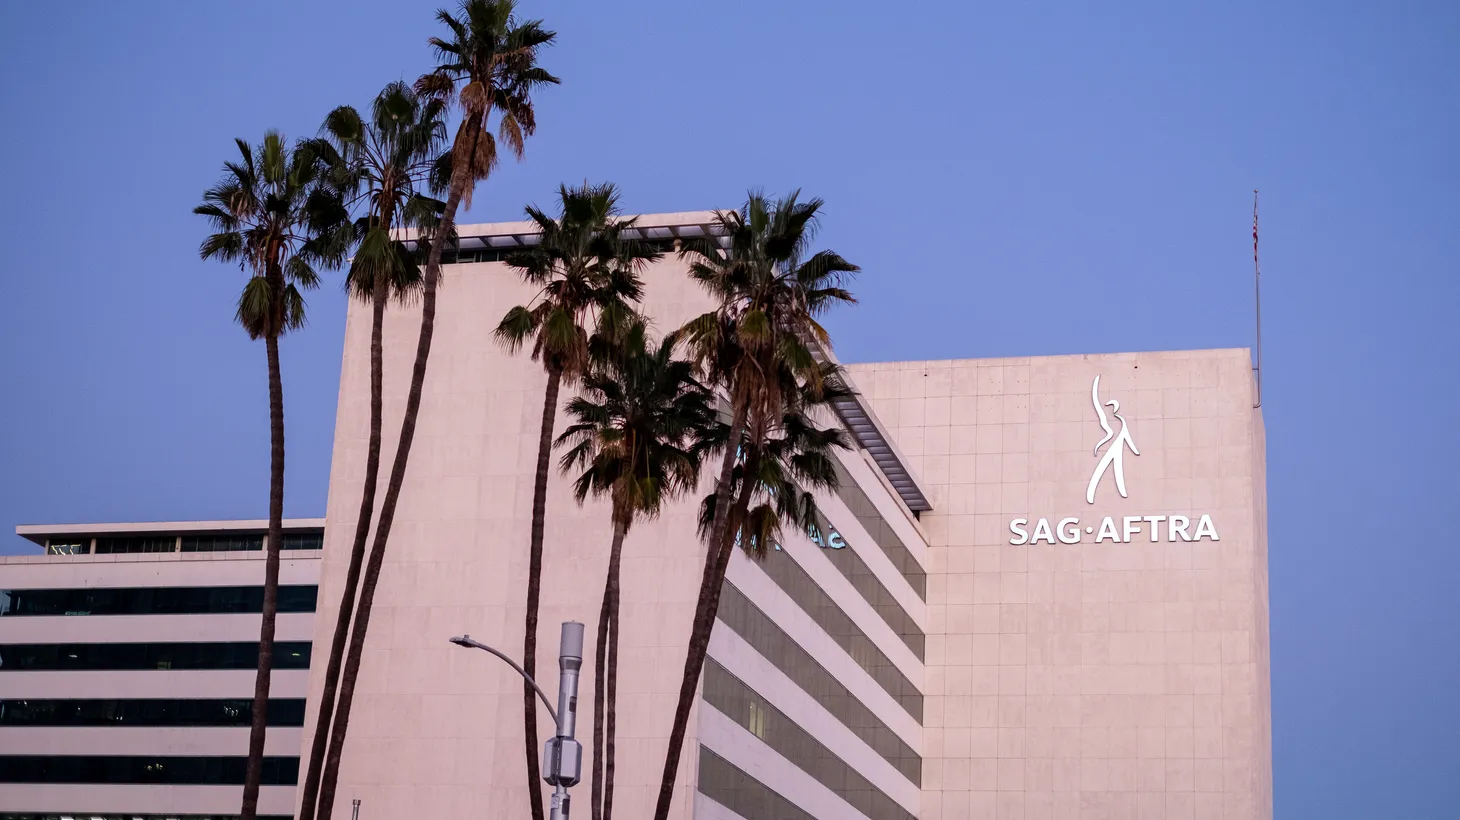 The SAG-AFTRA building is seen during sunset in Mid City, Los Angeles, CA.